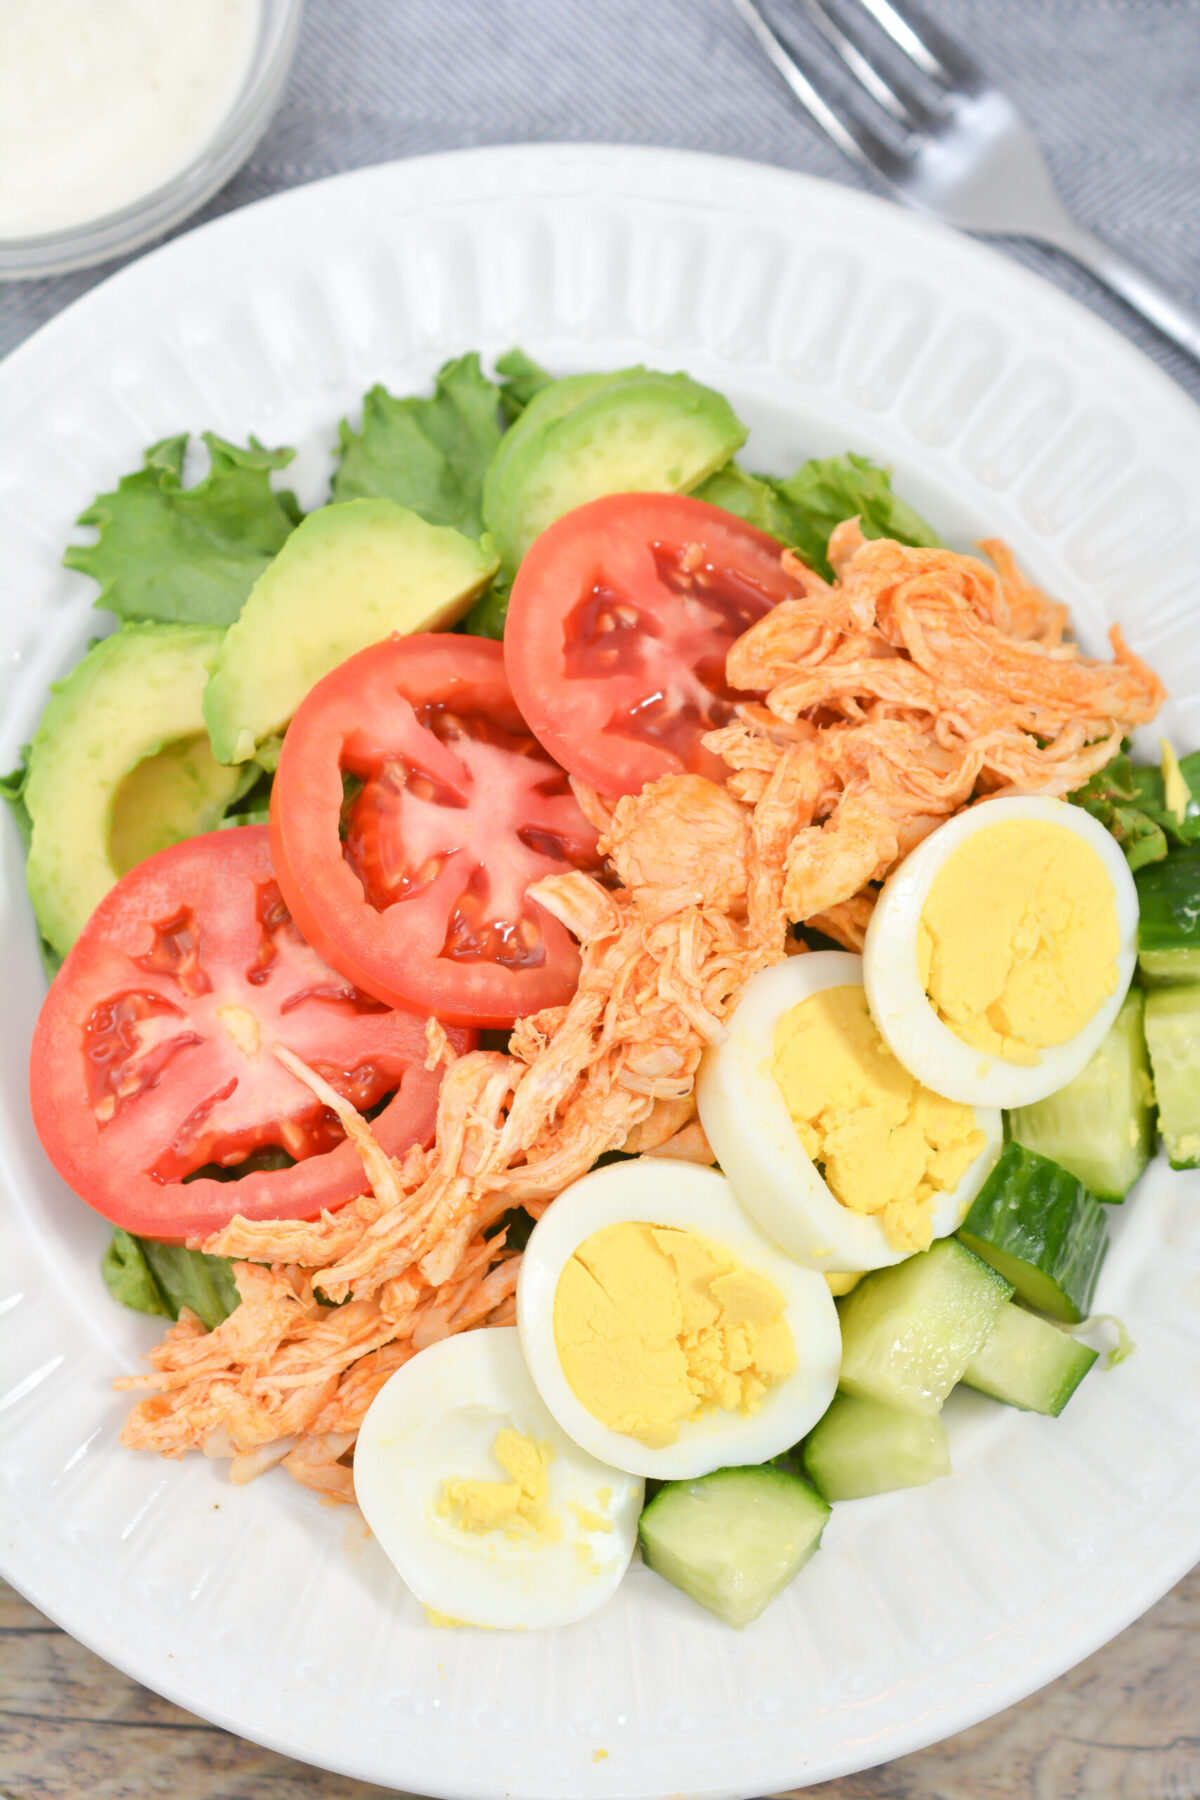 Simple to make with all healthy, wholesome ingredients, this Buffalo Chicken Cobb Salad is easy to make and delicious!